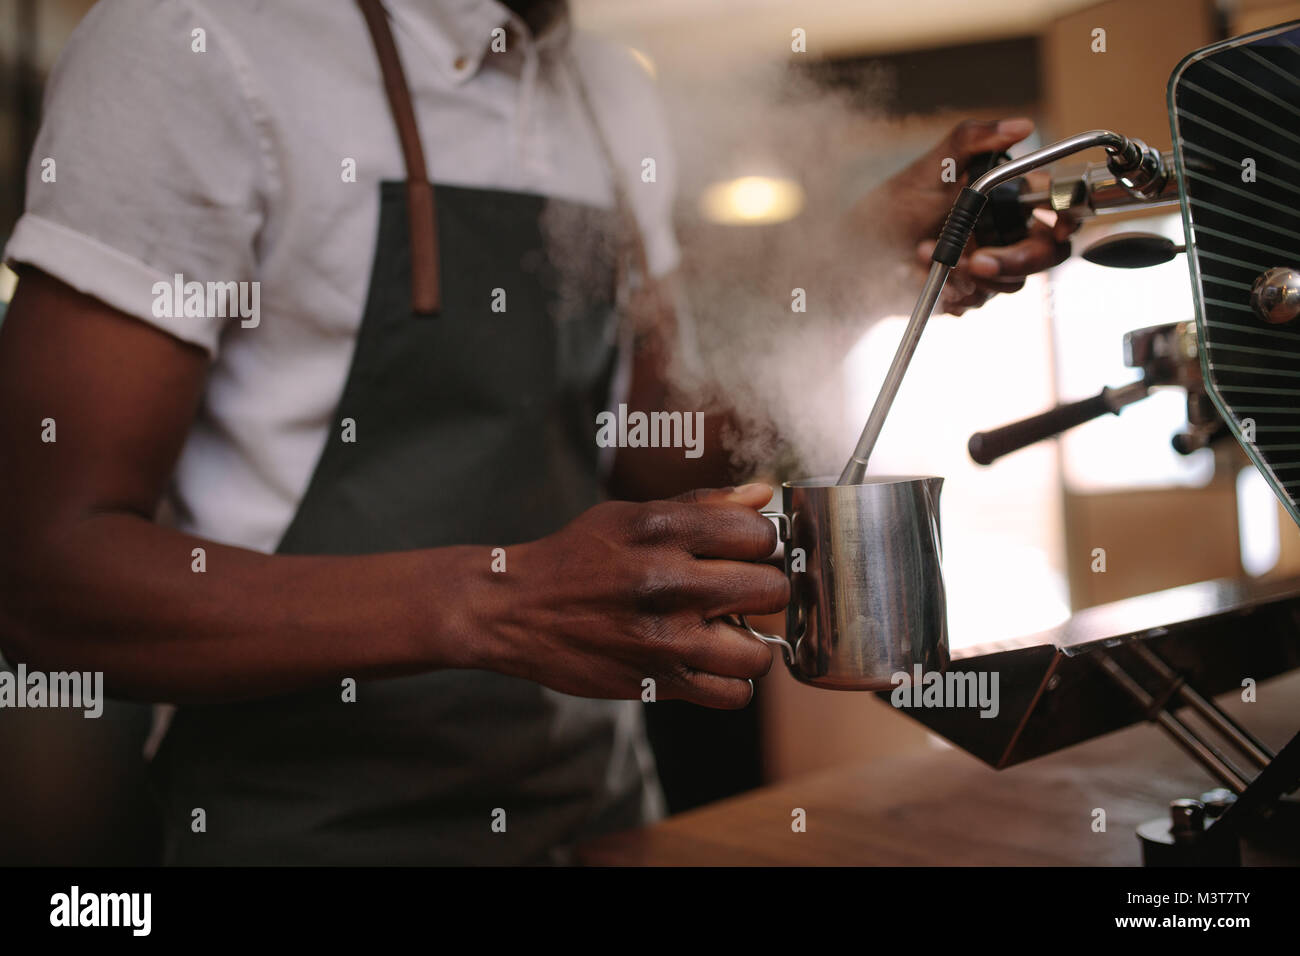 Coffee shop owner preparing coffee on steam espresso coffee machine. Cropped shot of man working in his coffee shop wearing an apron. Stock Photo